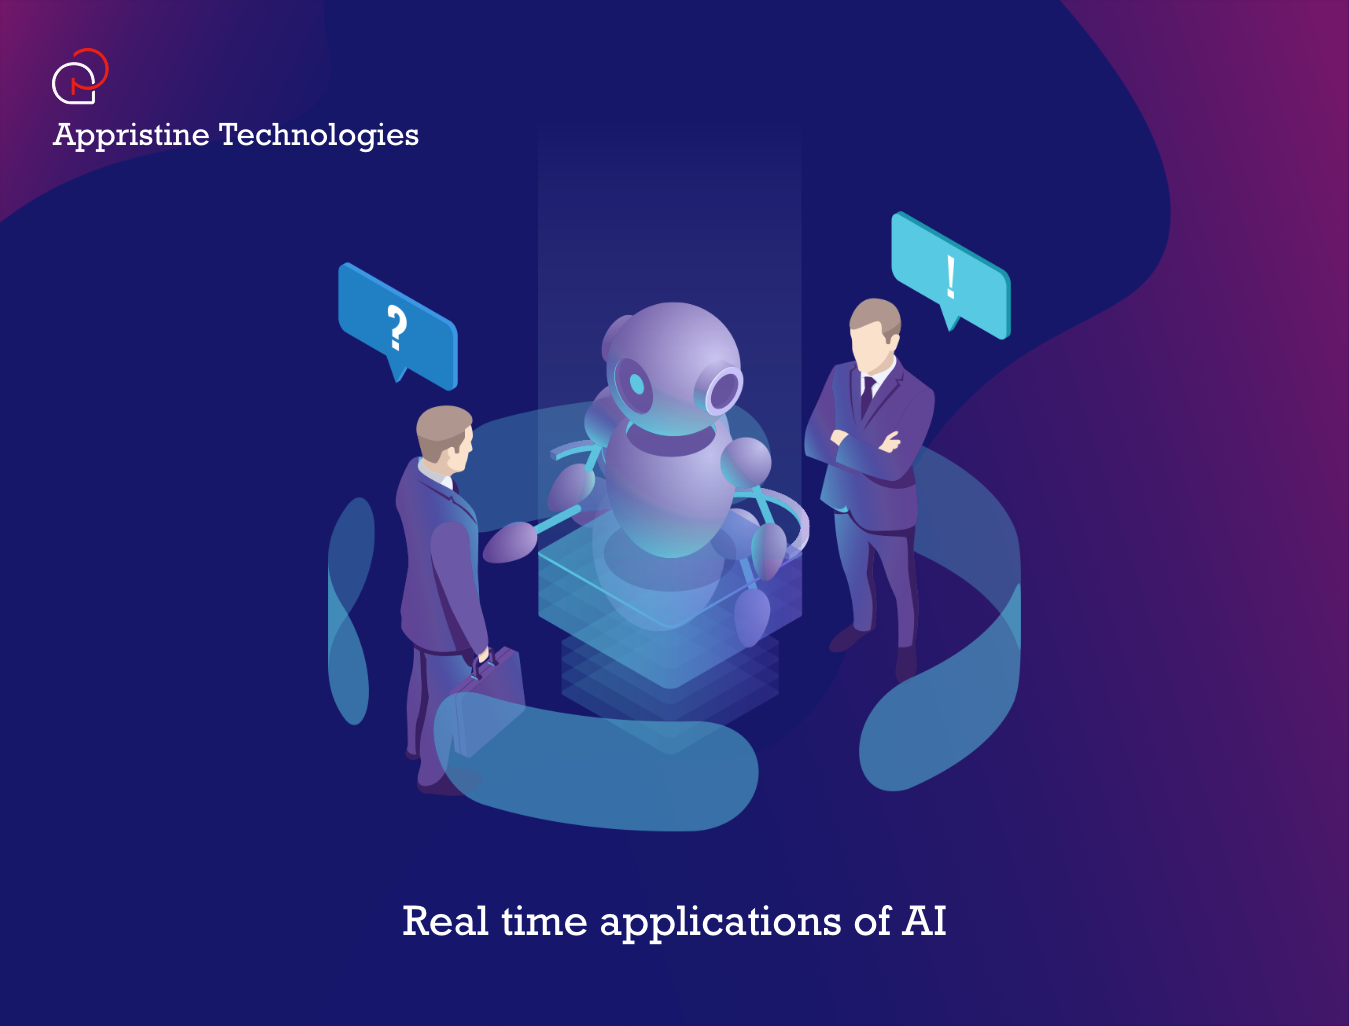 Real time applications of AI